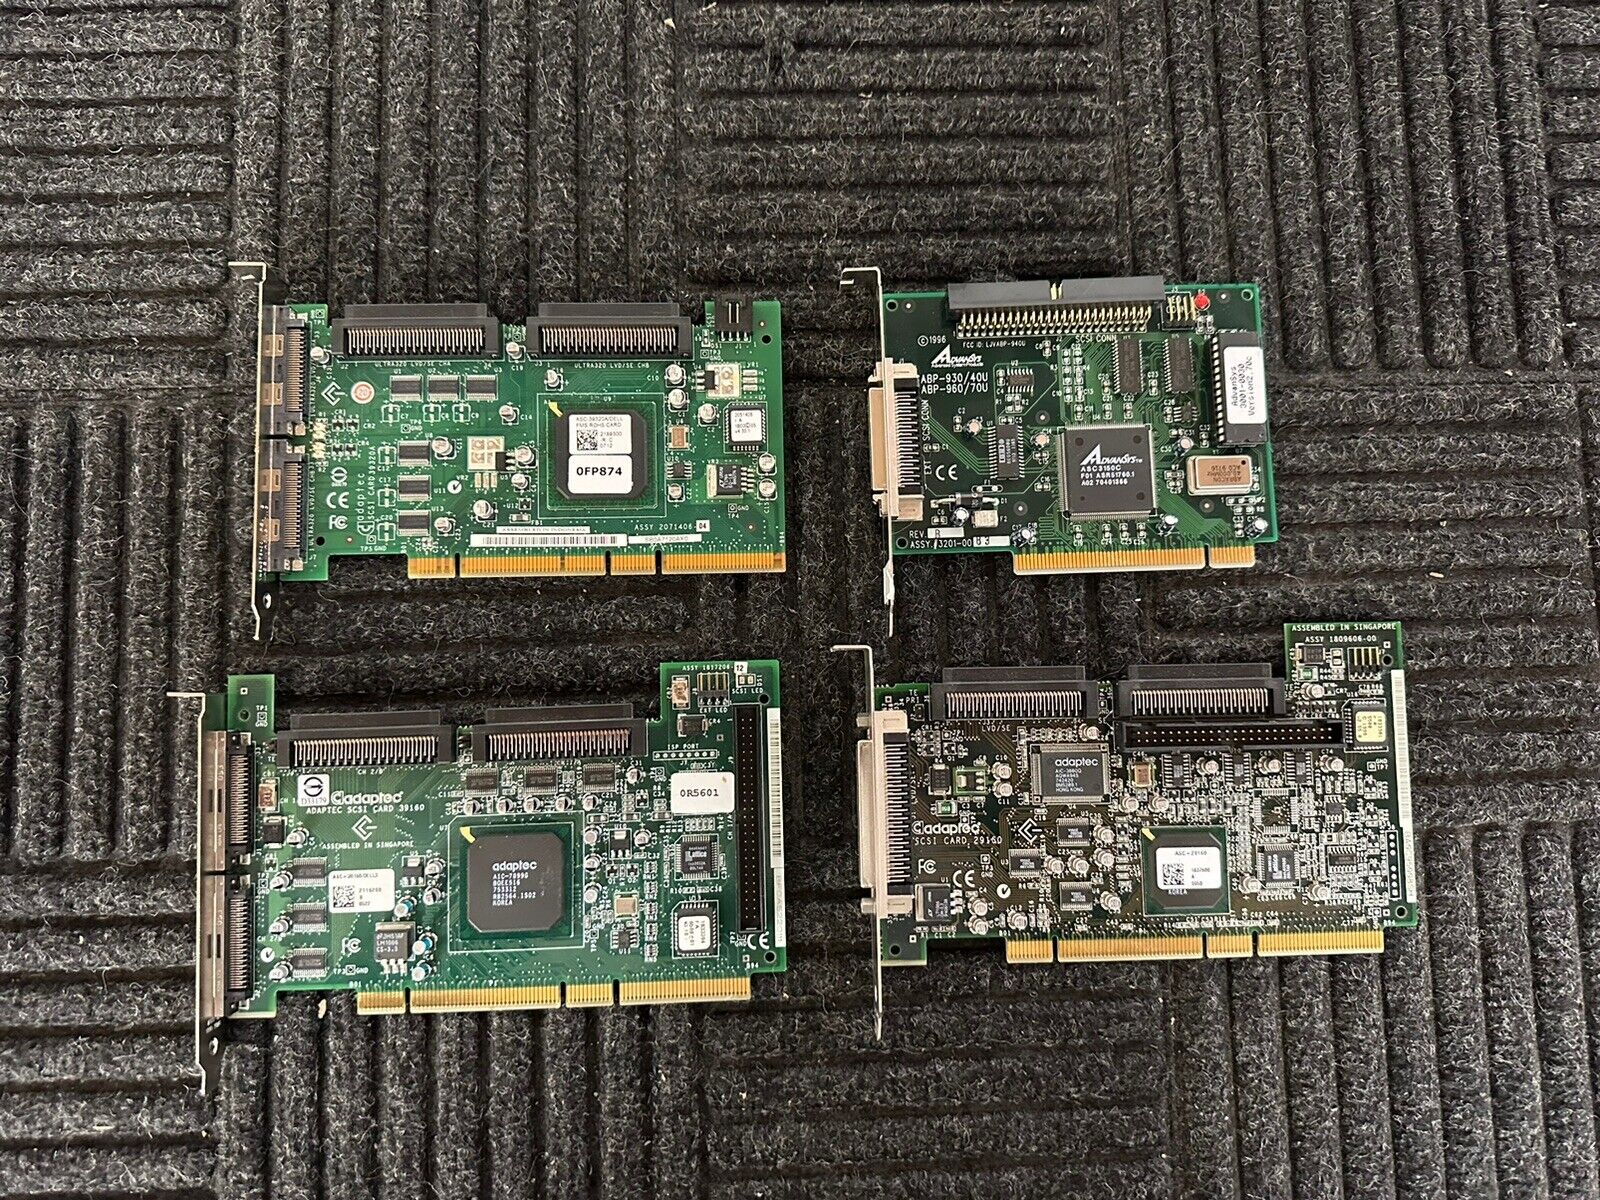 Lot Of 4 Adaptec SCSI Interface Card 39160, 29160, 39320A, ABP-930